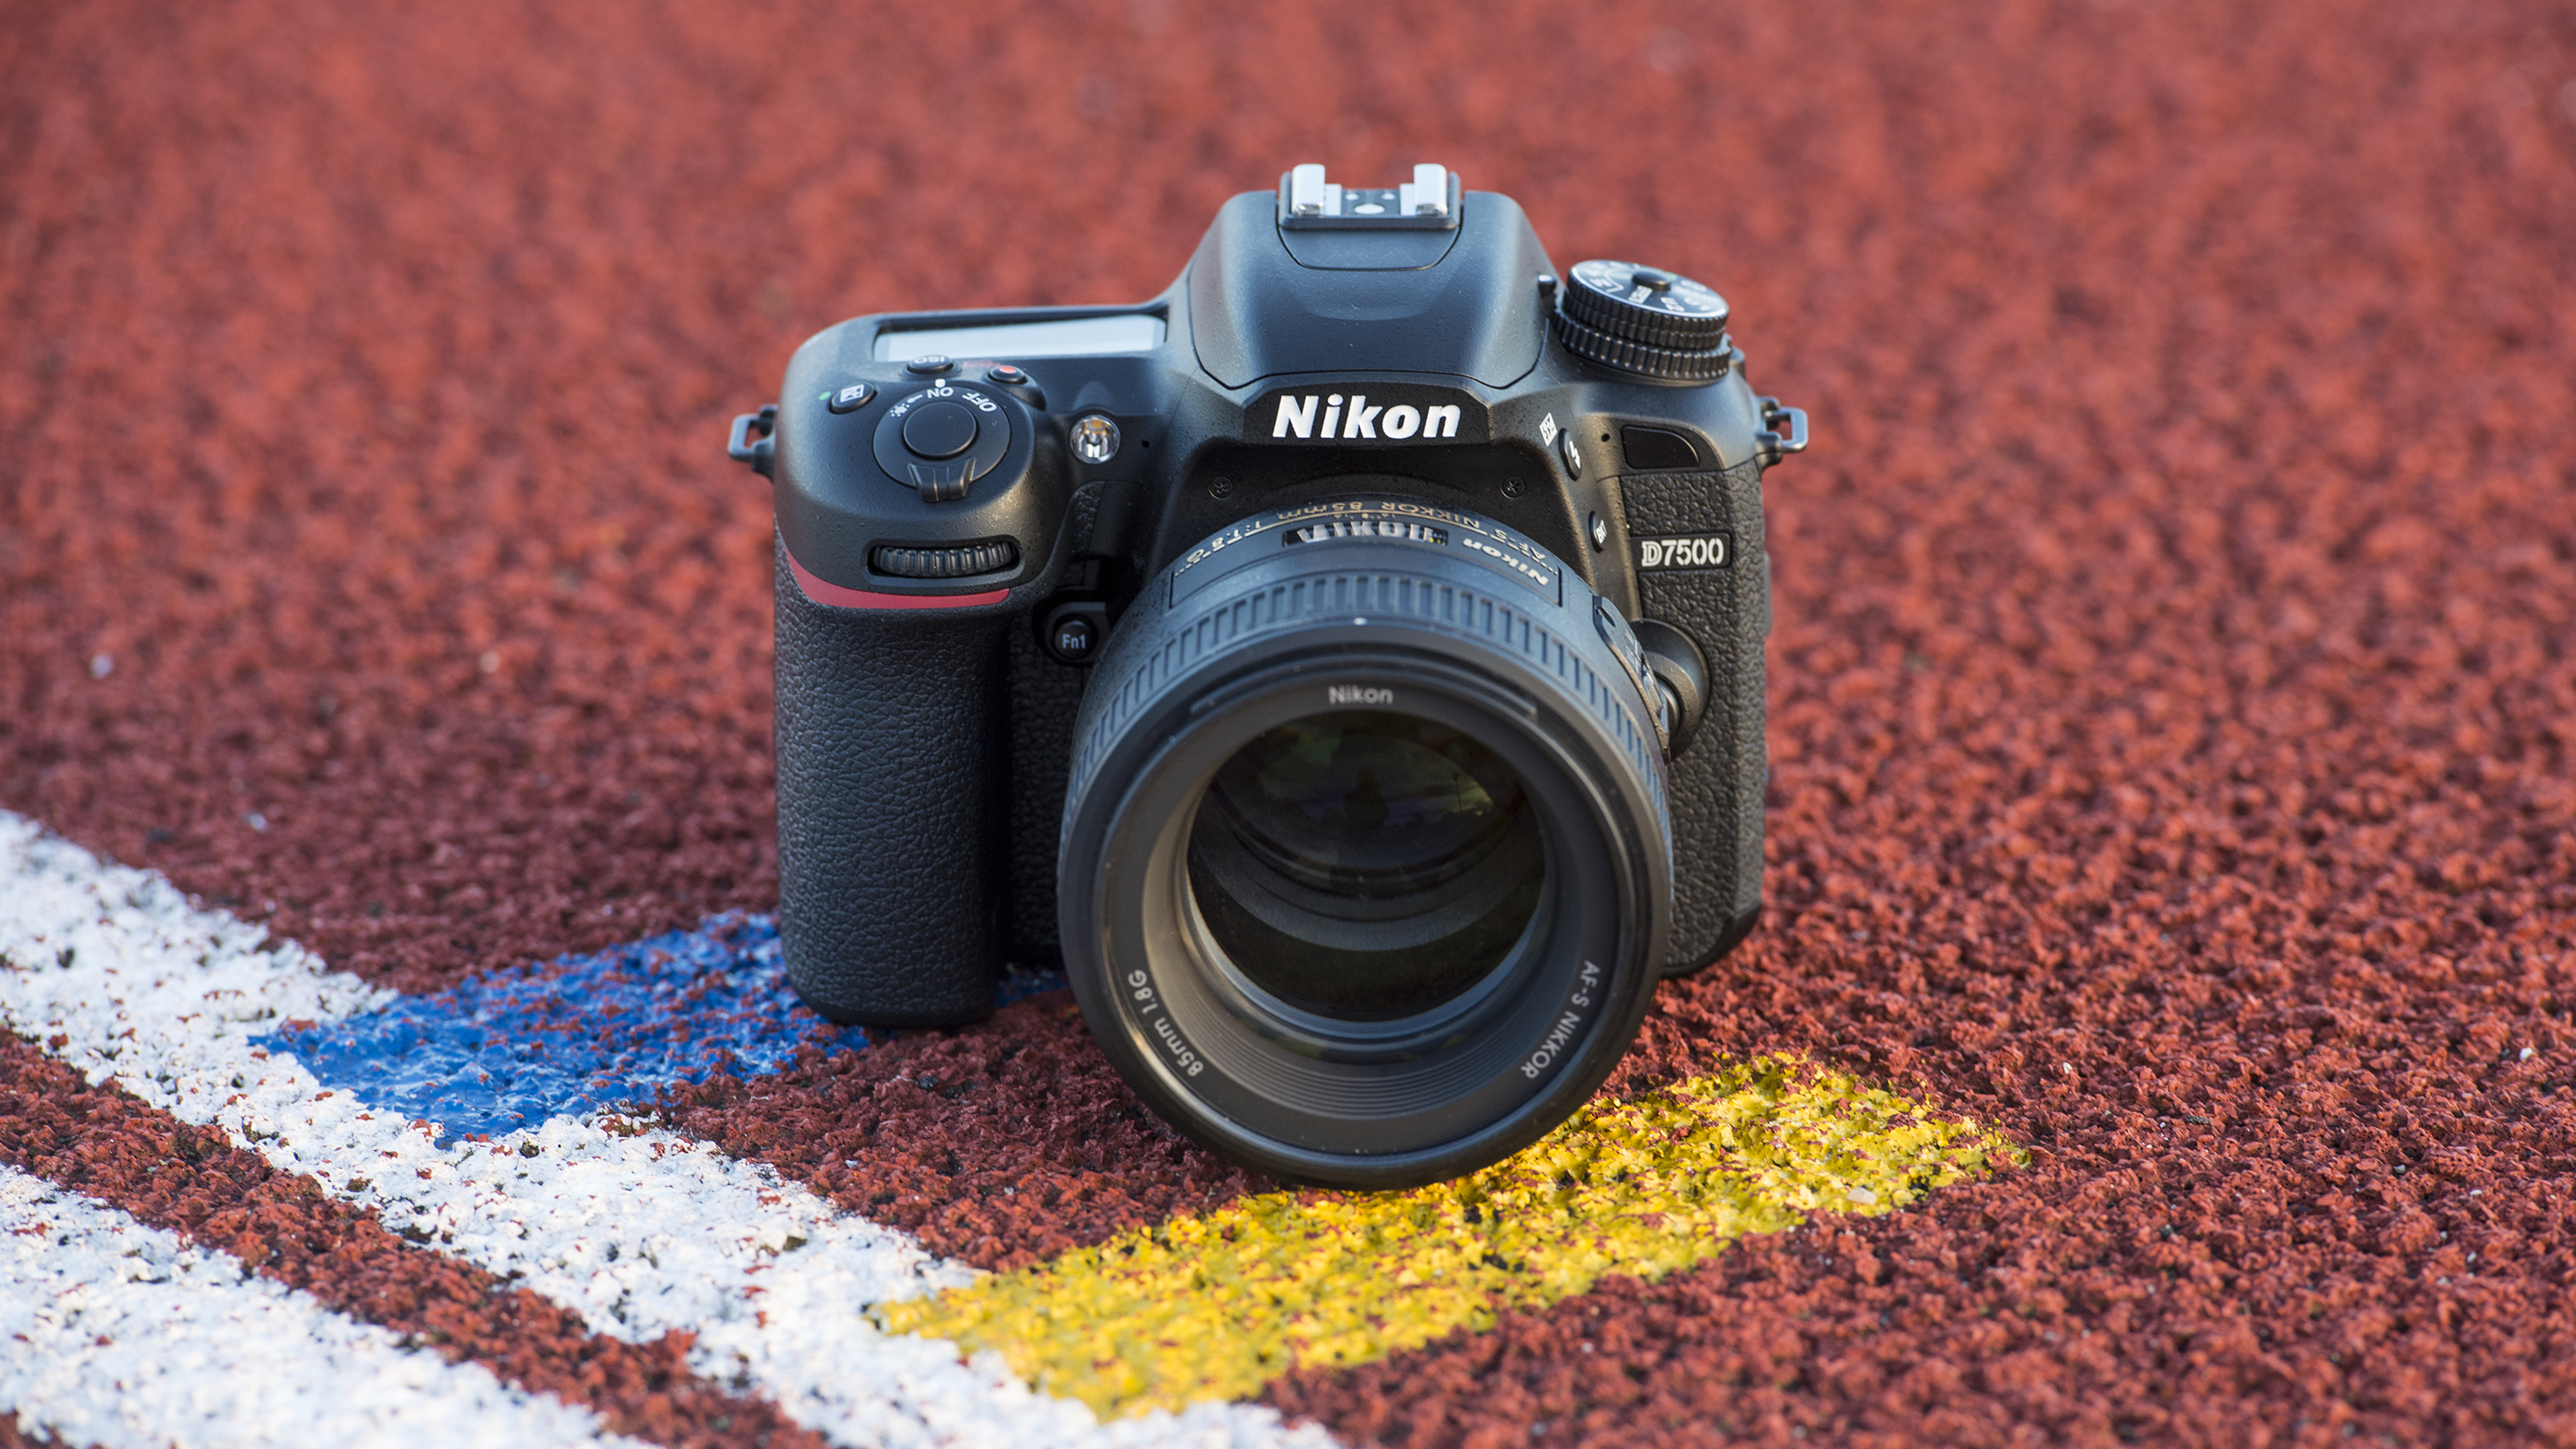 Best Nikon camera 2020: the 10 finest cameras from Nikon's line-up 14